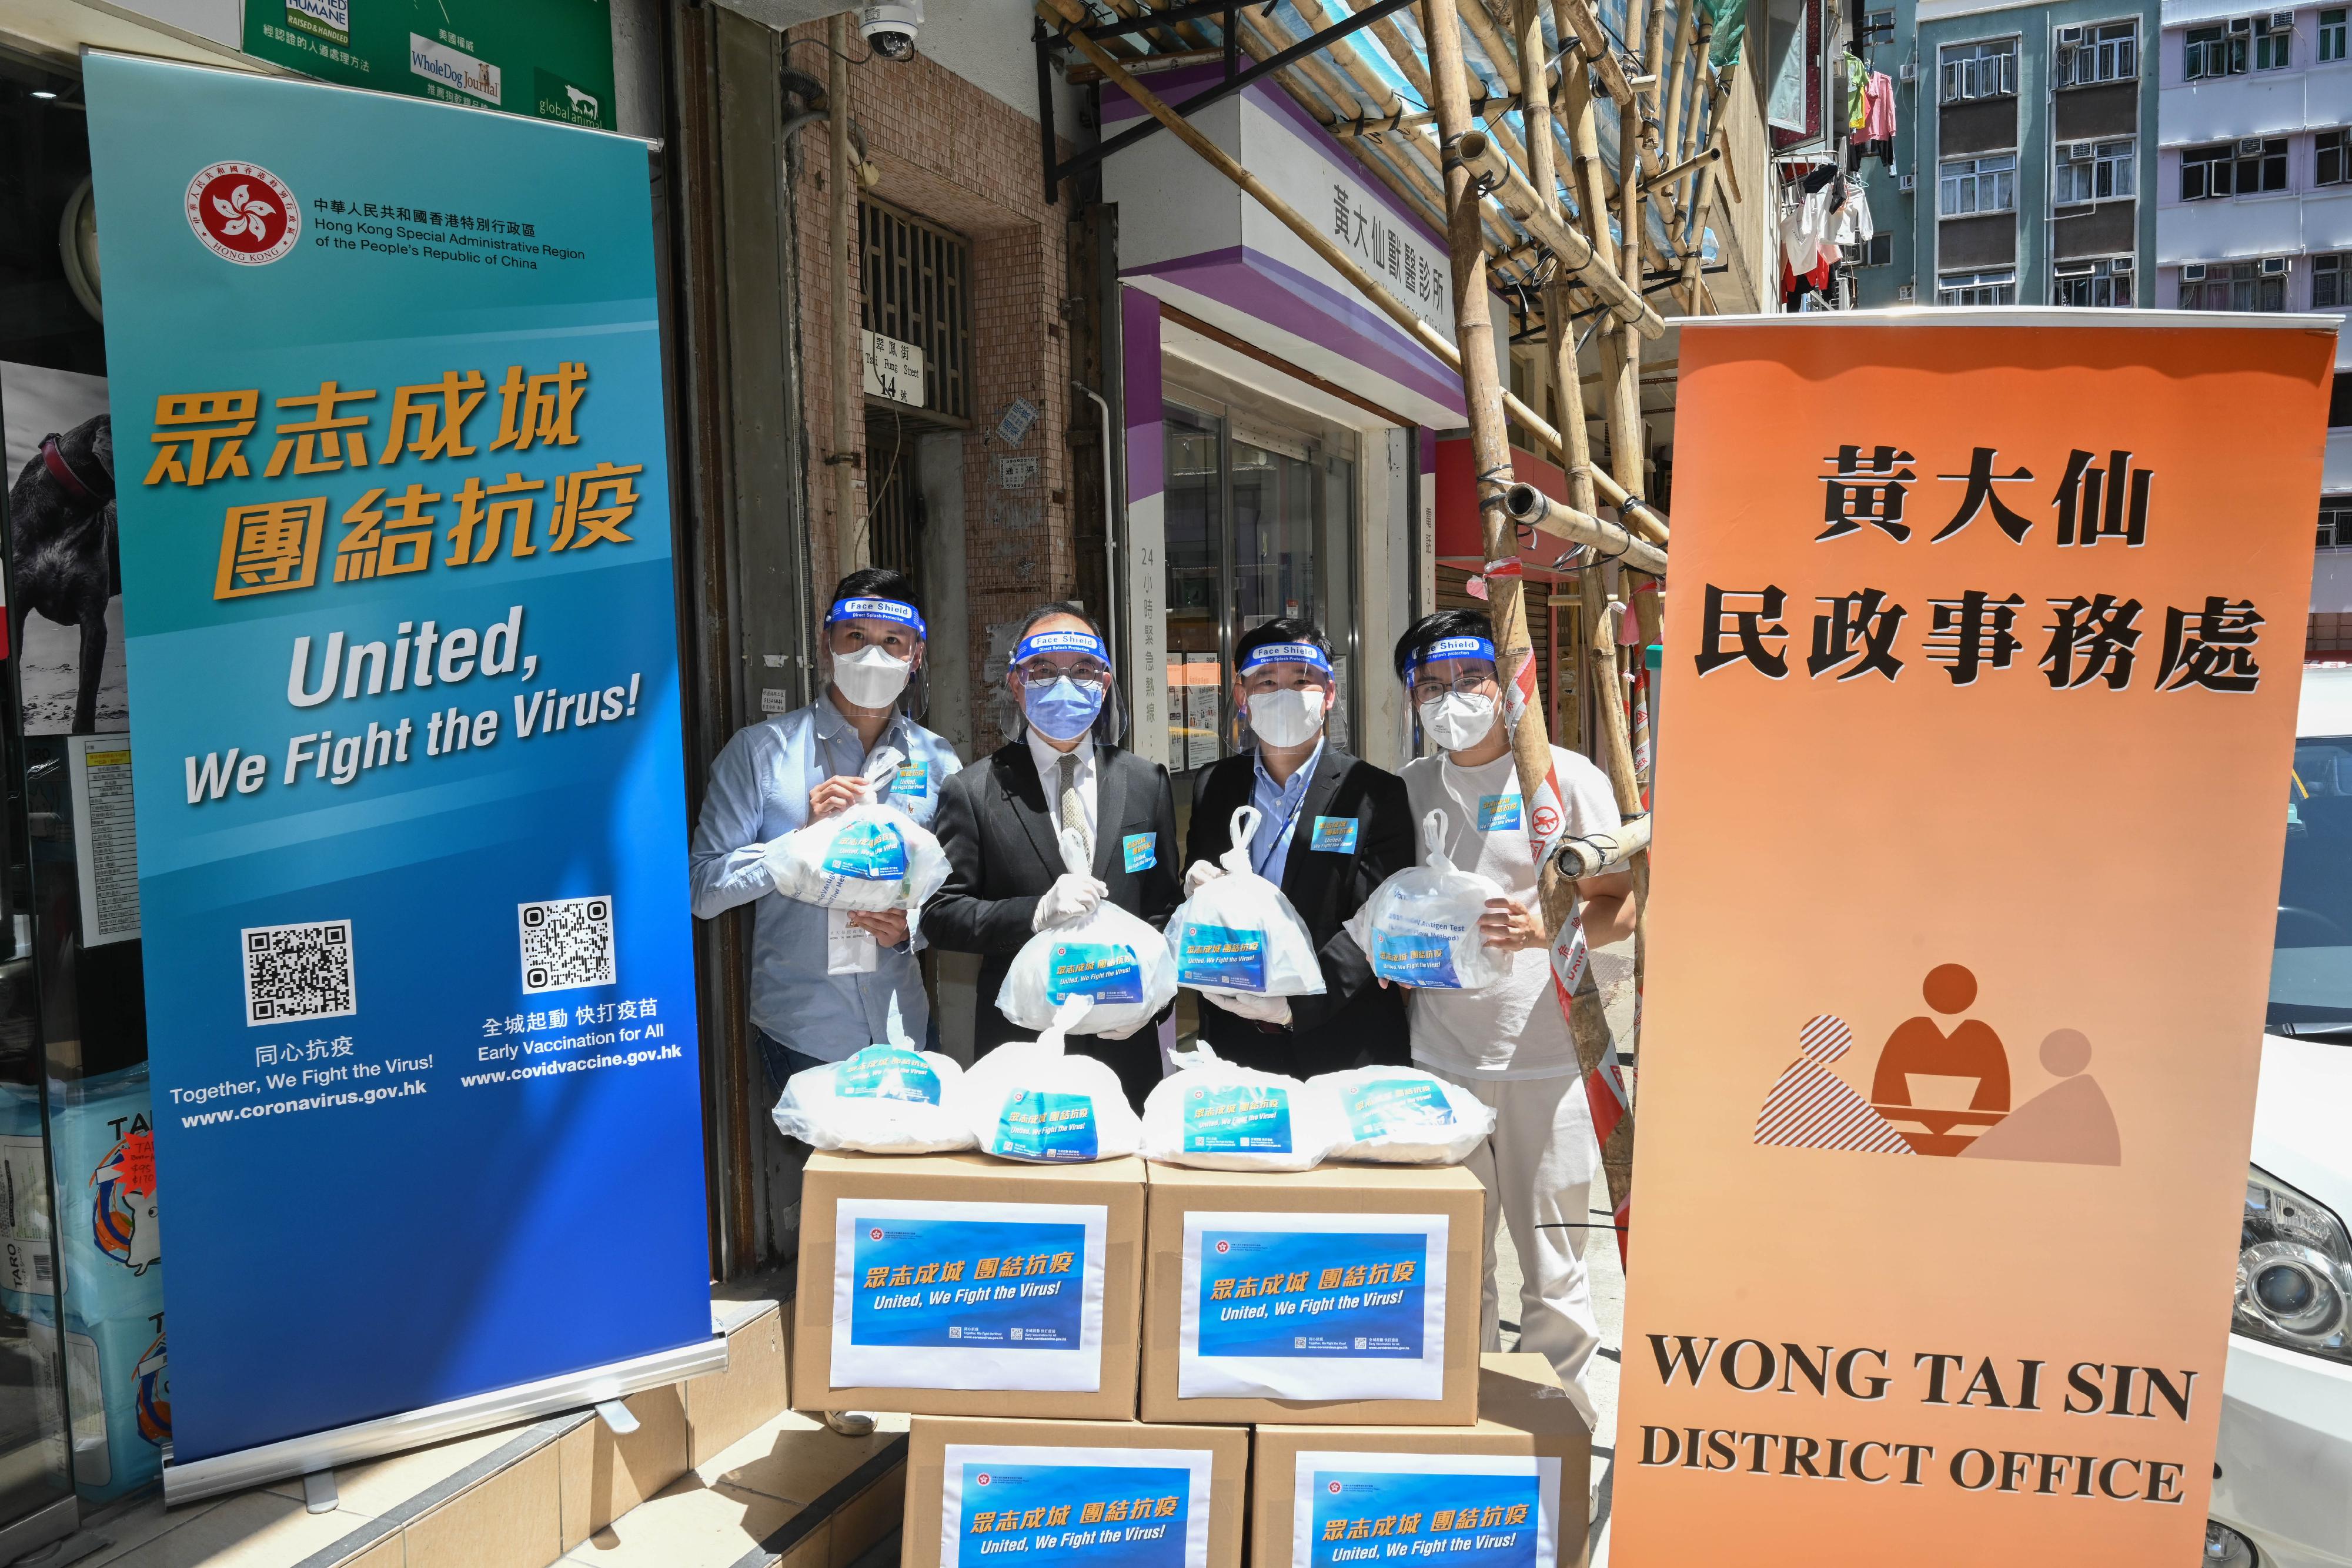 The Secretary for Constitutional and Mainland Affairs, Mr Erick Tsang Kwok-wai, today (April 4) led the Constitutional and Mainland Affairs Bureau team to distribute anti-epidemic service bags in Wong Tai Sin and showed his support for the participating volunteers. Mr Tsang (second left); the Under Secretary for Constitutional and Mainland Affairs, Mr Clement Woo (second right); and the District Officer (Wong Tai Sin), Mr Steve Wong (first left), are pictured with a volunteer before distributing the service bags.